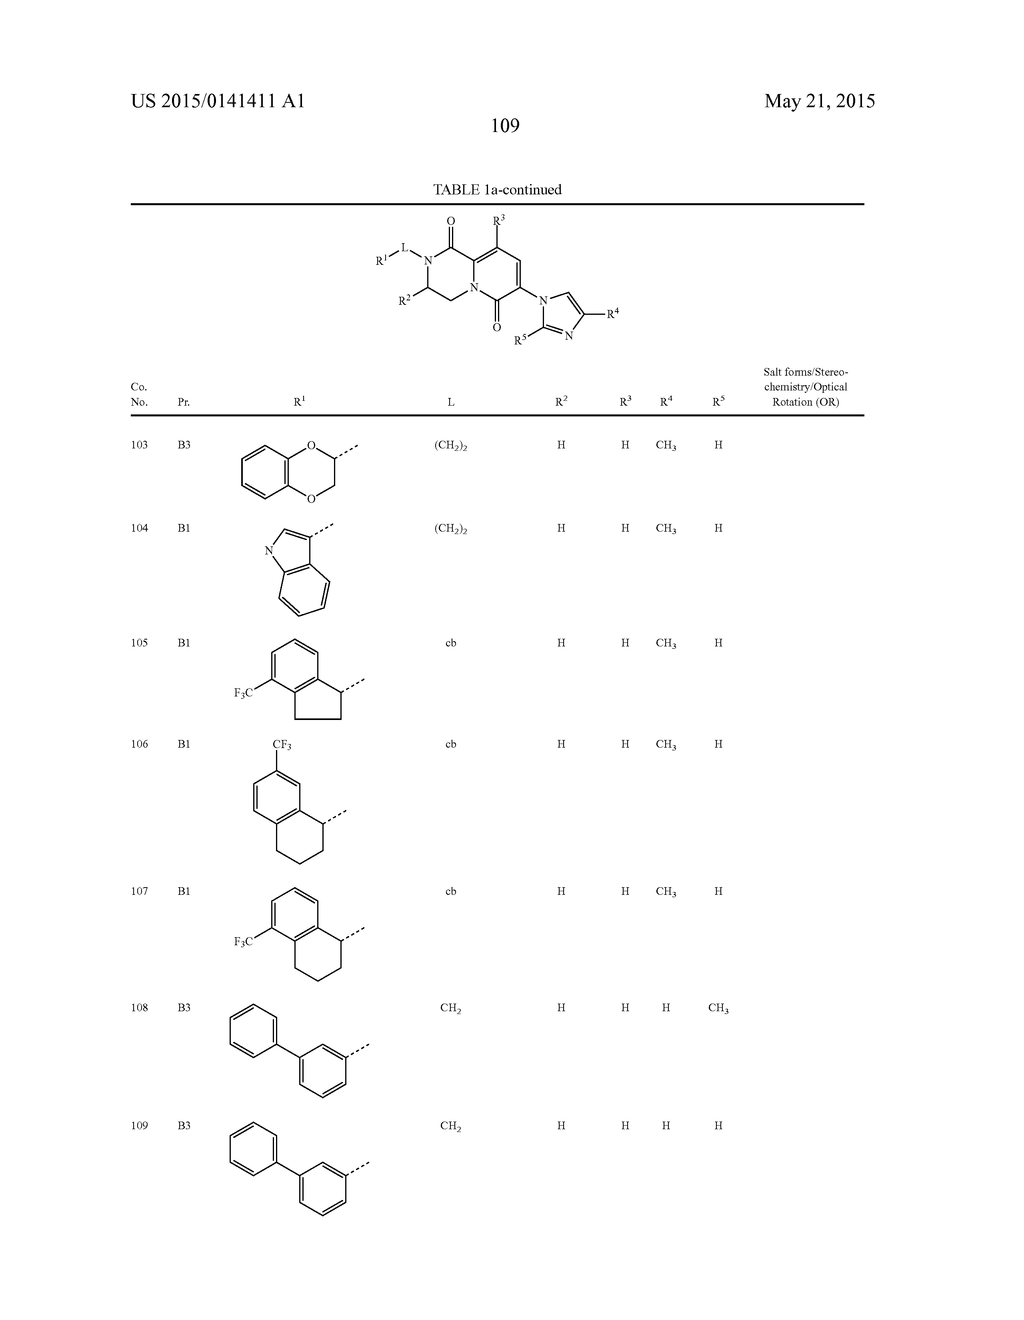 SUBSTITUTED 3,4-DIHYDRO-2H-PYRIDO[1,2-A]PYRAZINE-1,6-DIONE DERIVATIVES     USEFUL FOR THE TREATMENT OF (INTER ALIA) ALZHEIMER'S DISEASE - diagram, schematic, and image 110